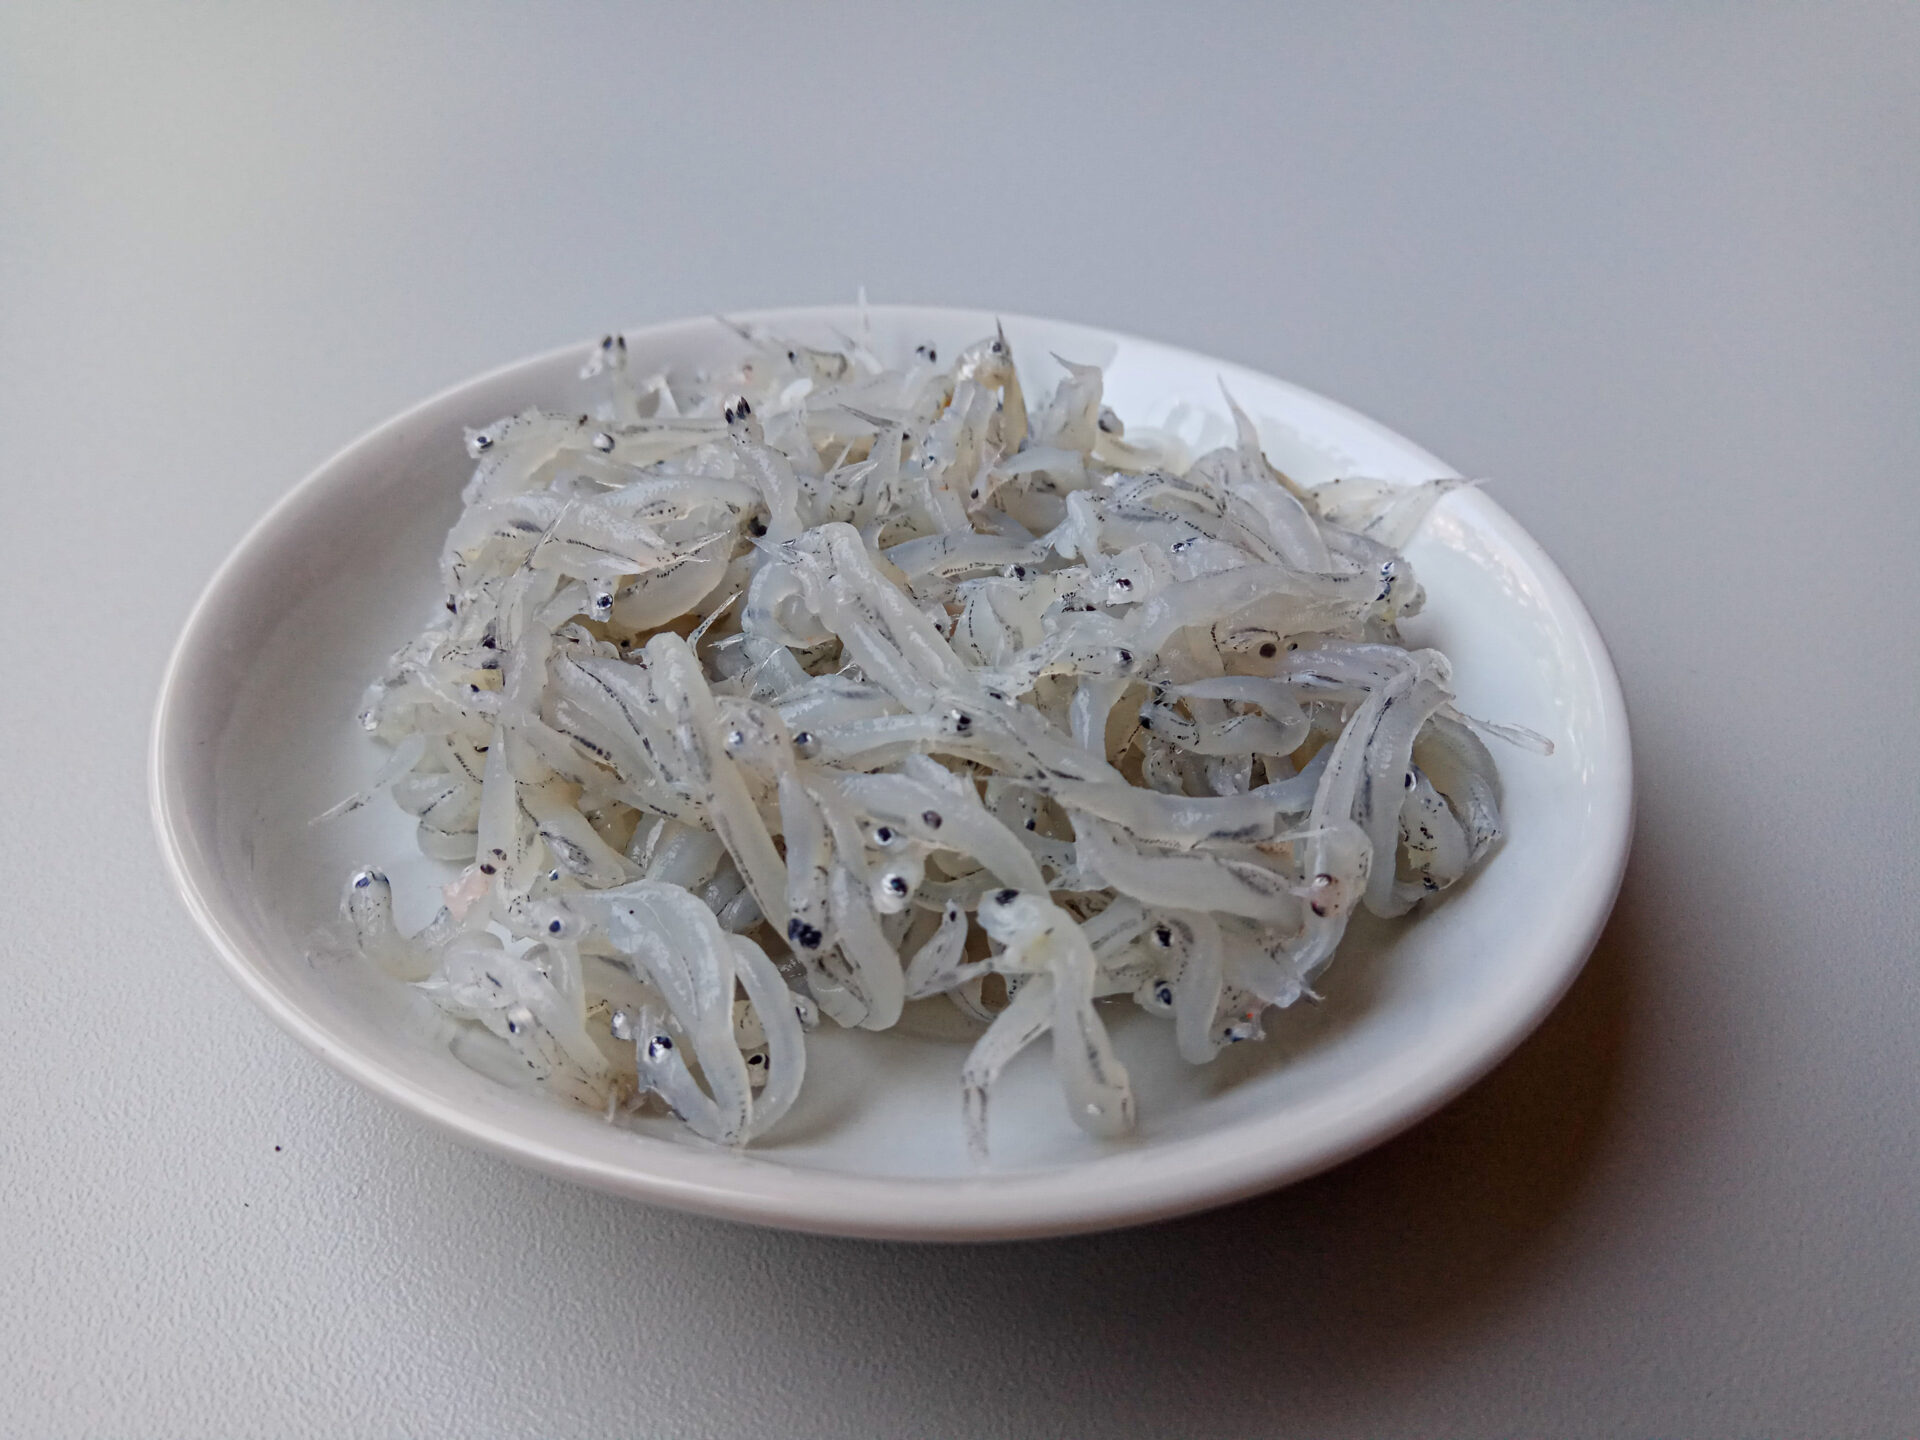 Whitebait,Or,Baby,Anchovy,Fish,Or,Teri,Nasi,In,Indonesia.